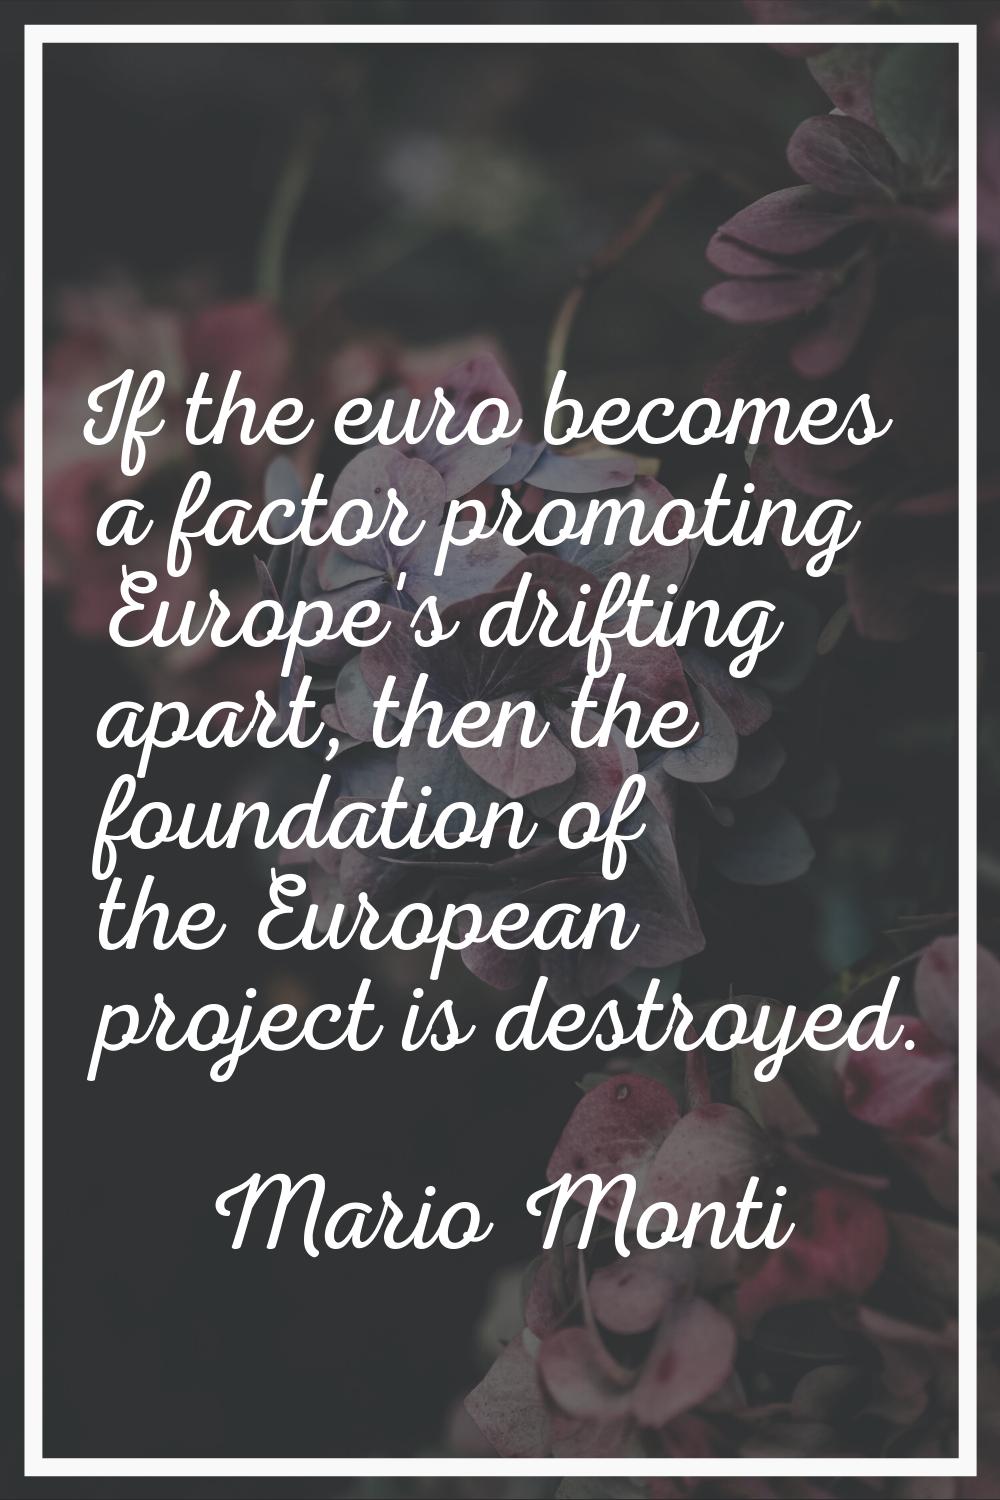 If the euro becomes a factor promoting Europe's drifting apart, then the foundation of the European